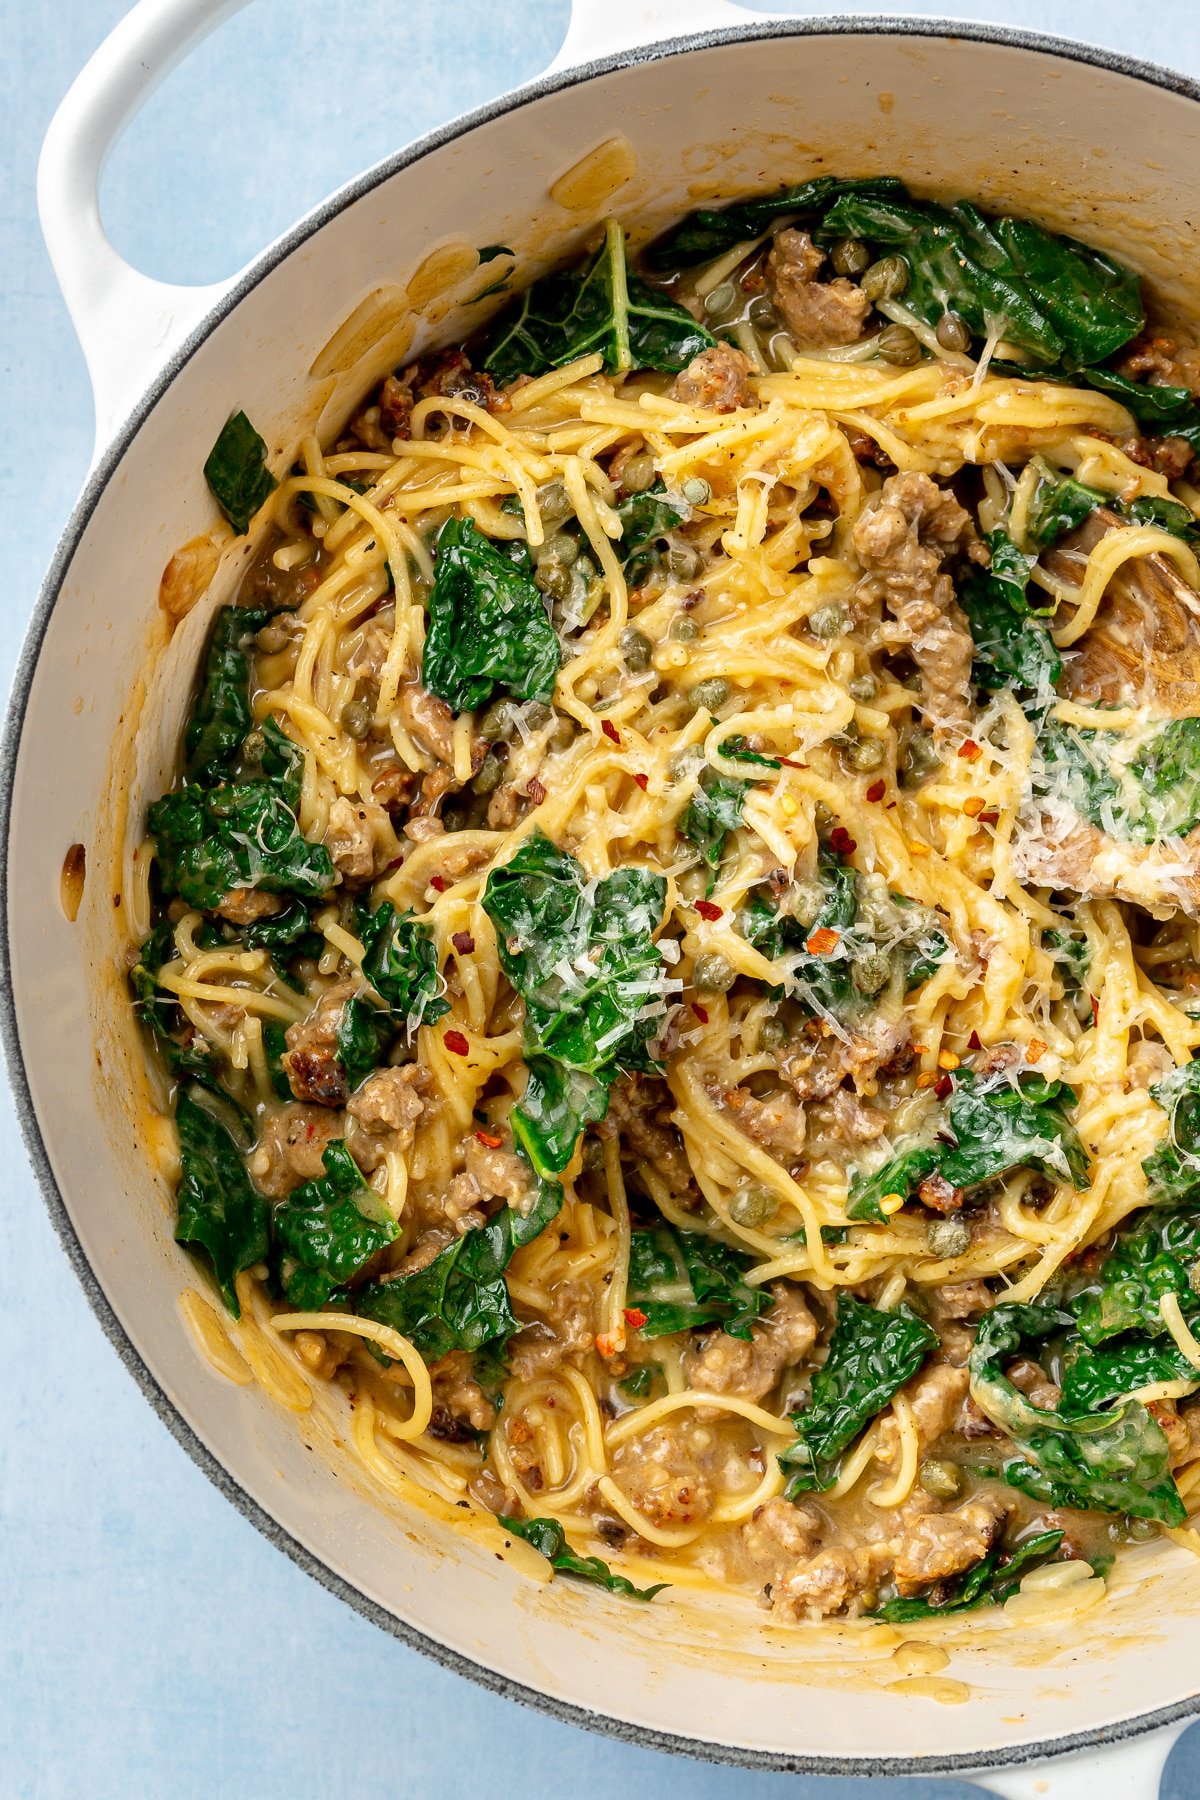 Parmesan cheese has been stirred into the kale, sausage, and spaghetti mixture. Red pepper flakes have been added to the top.